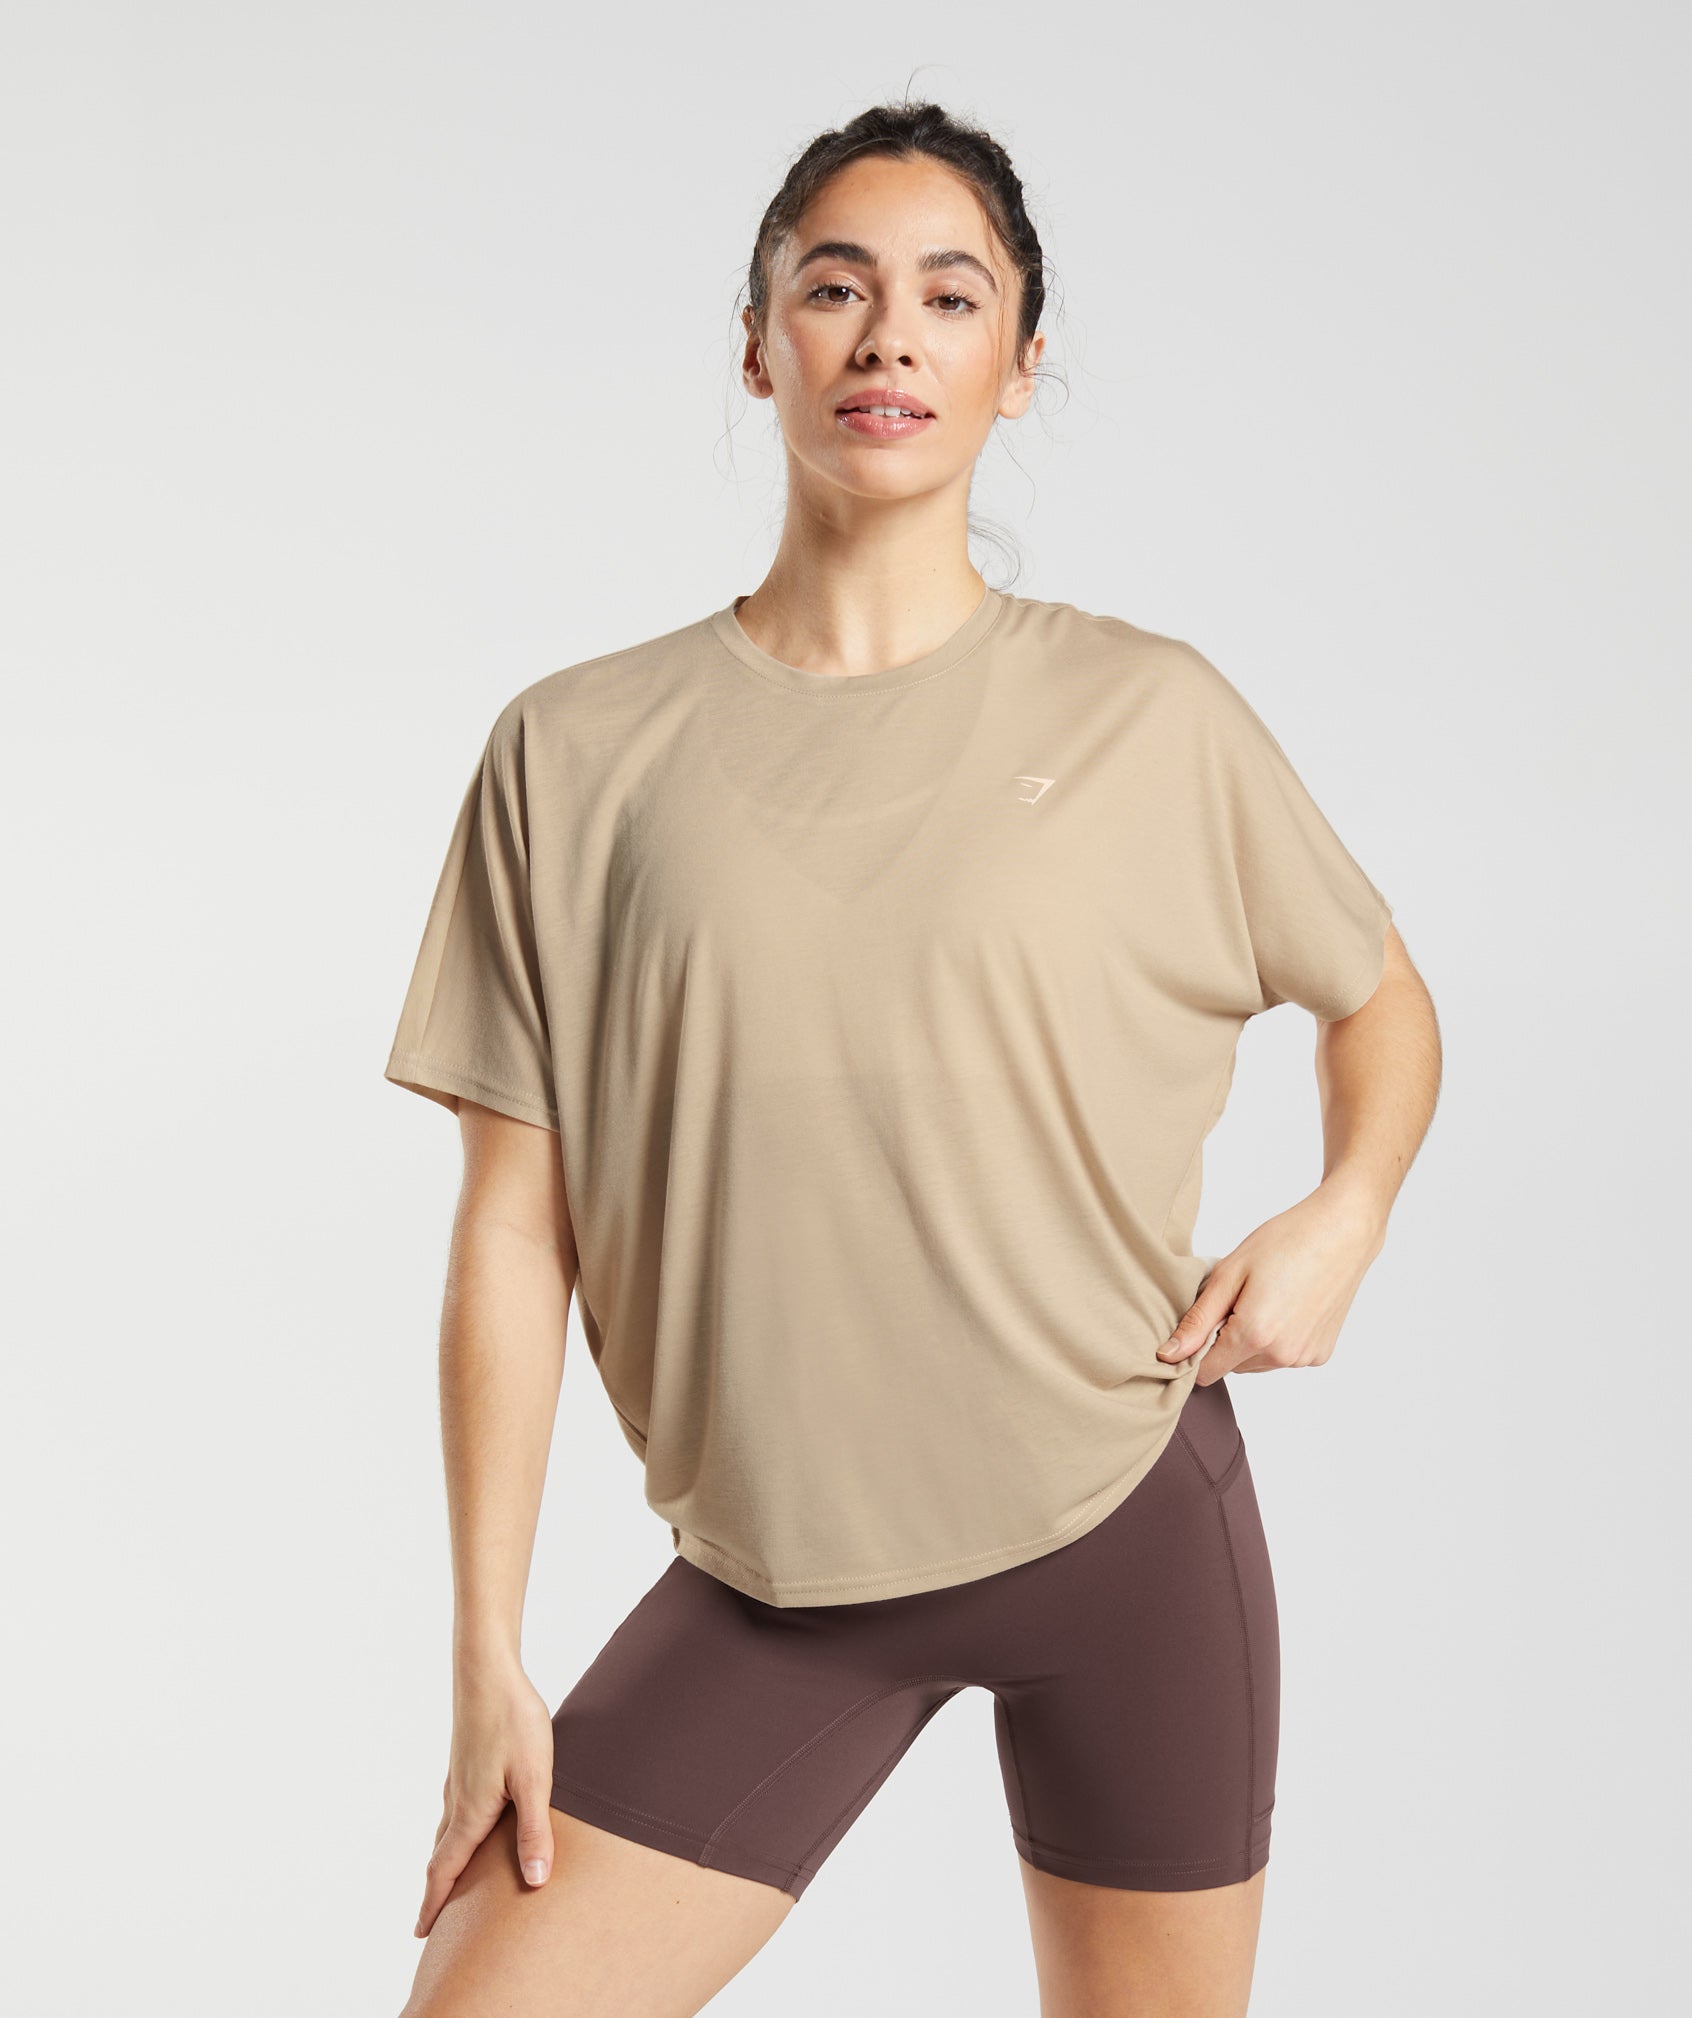 Super Soft T-Shirt in Toasted Brown